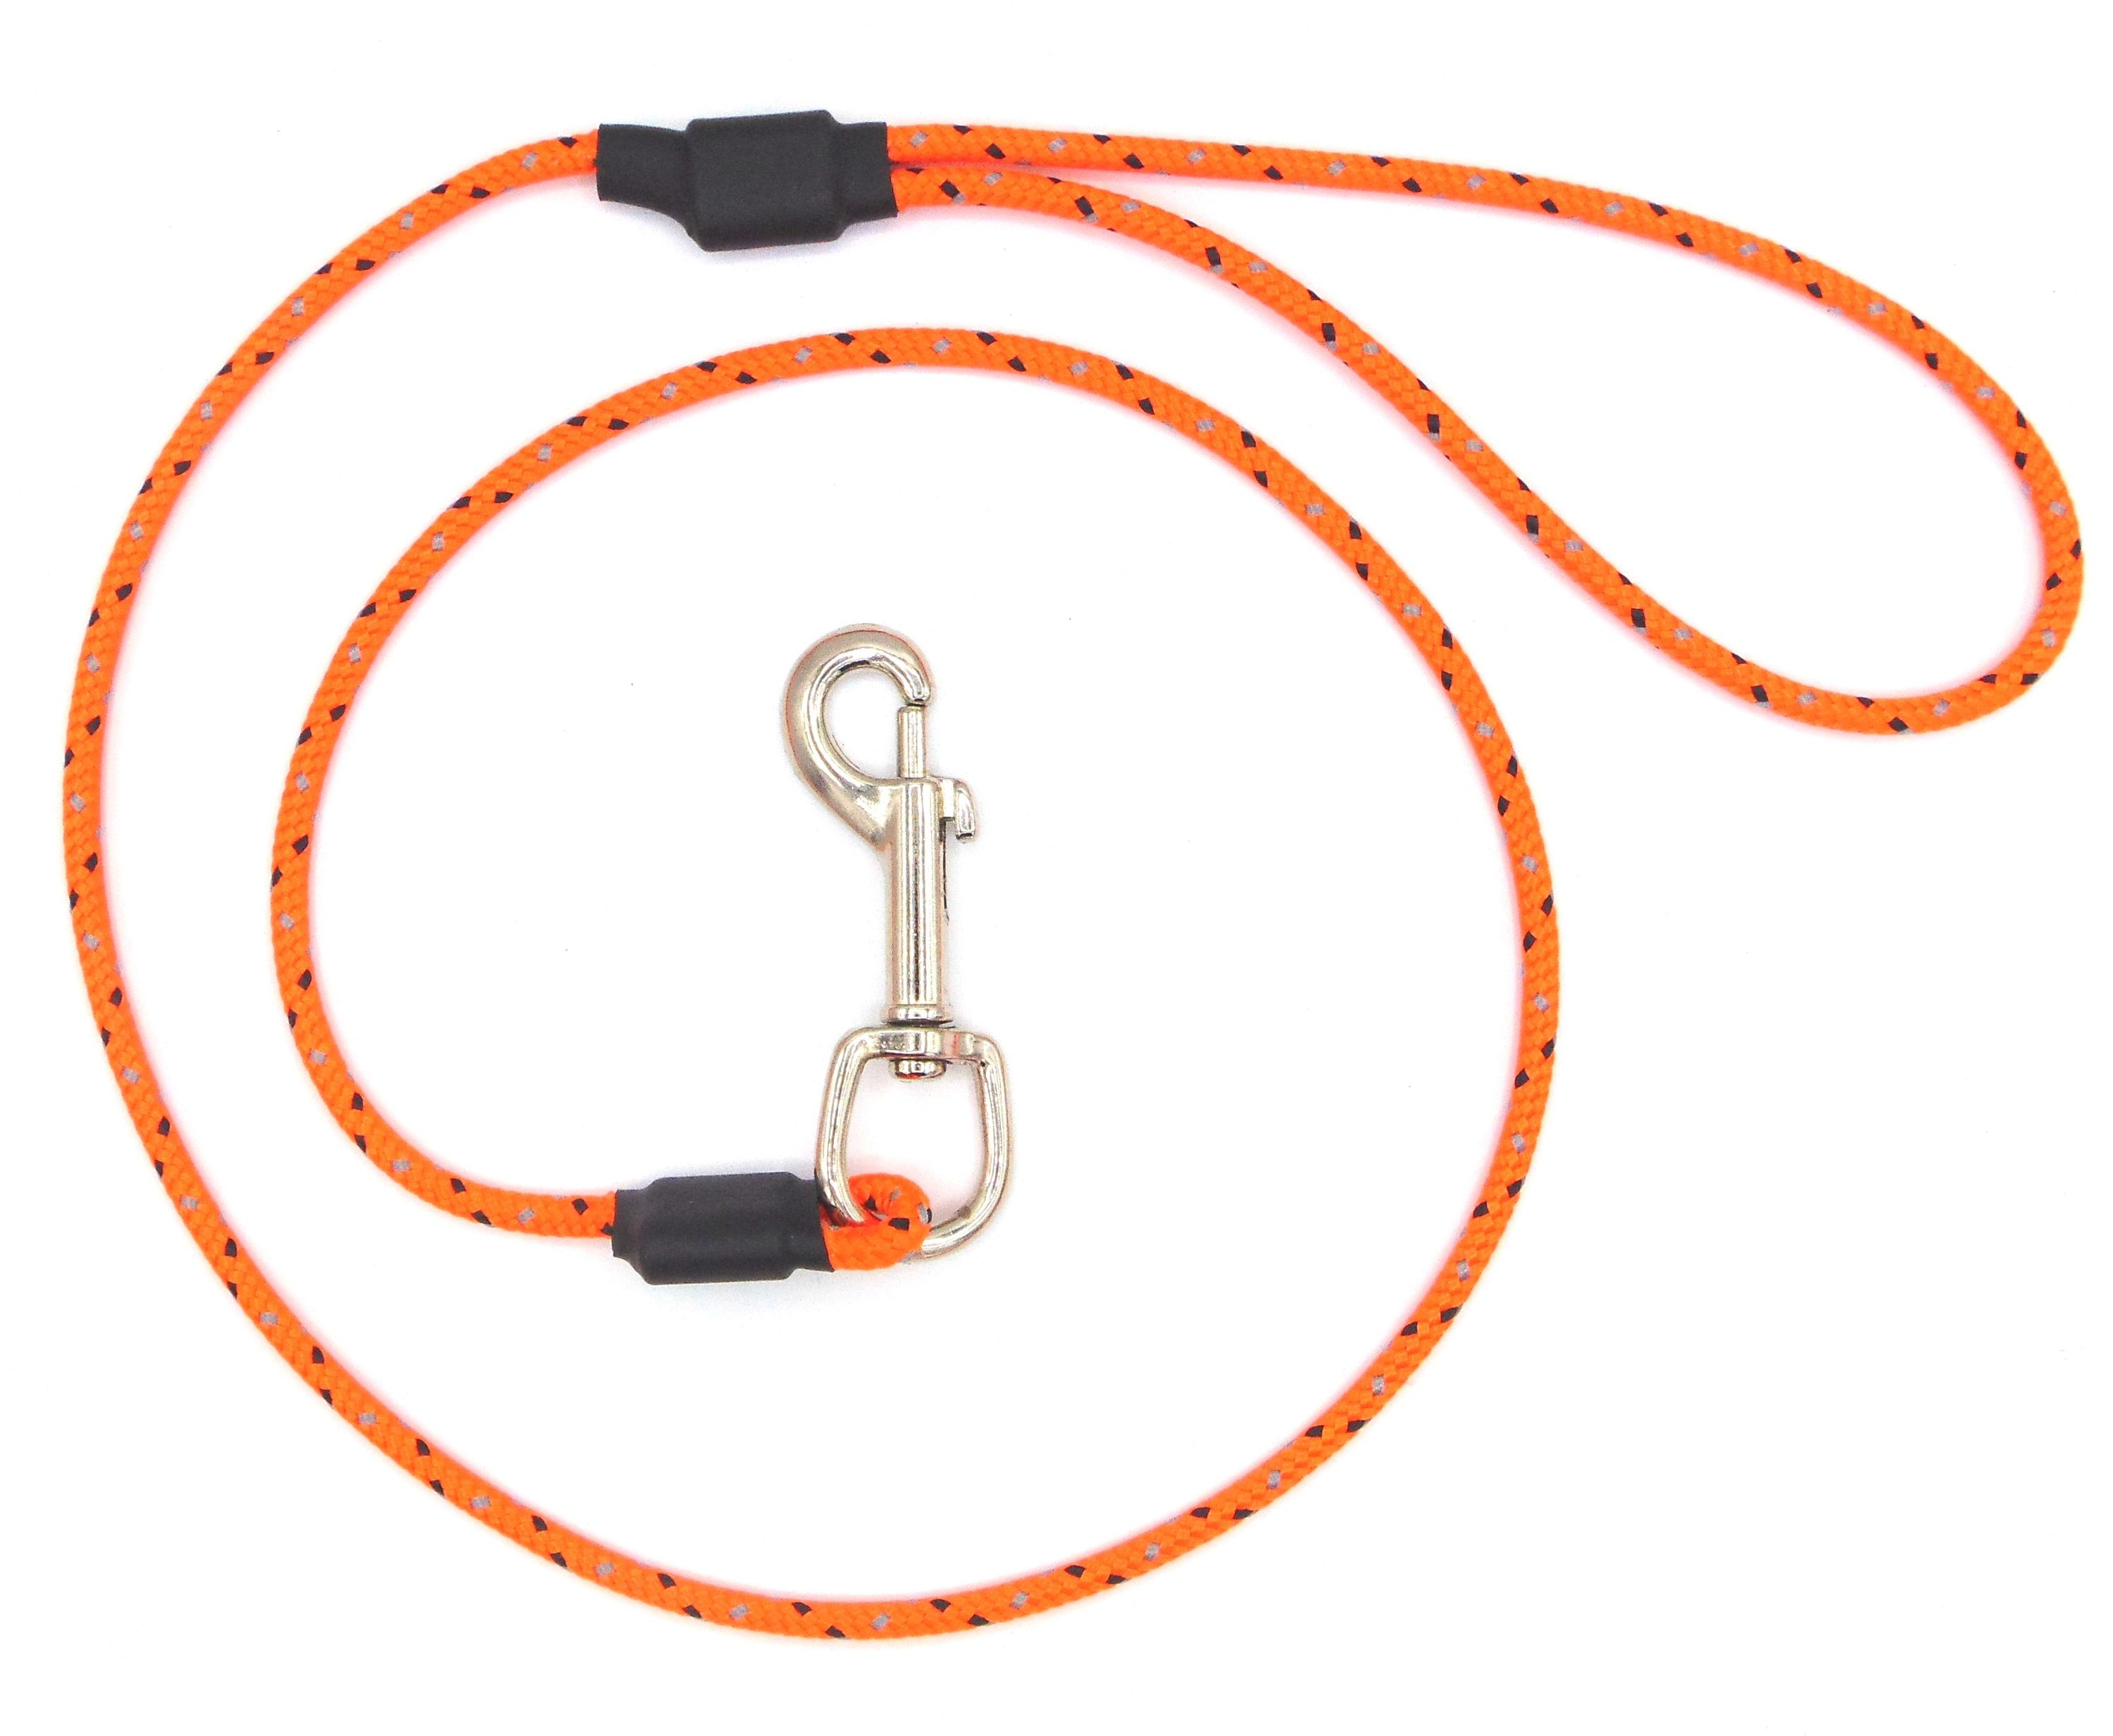 Field Trial PRO Collection - Field Trial PRO Trigger Hook Lead 1m ...